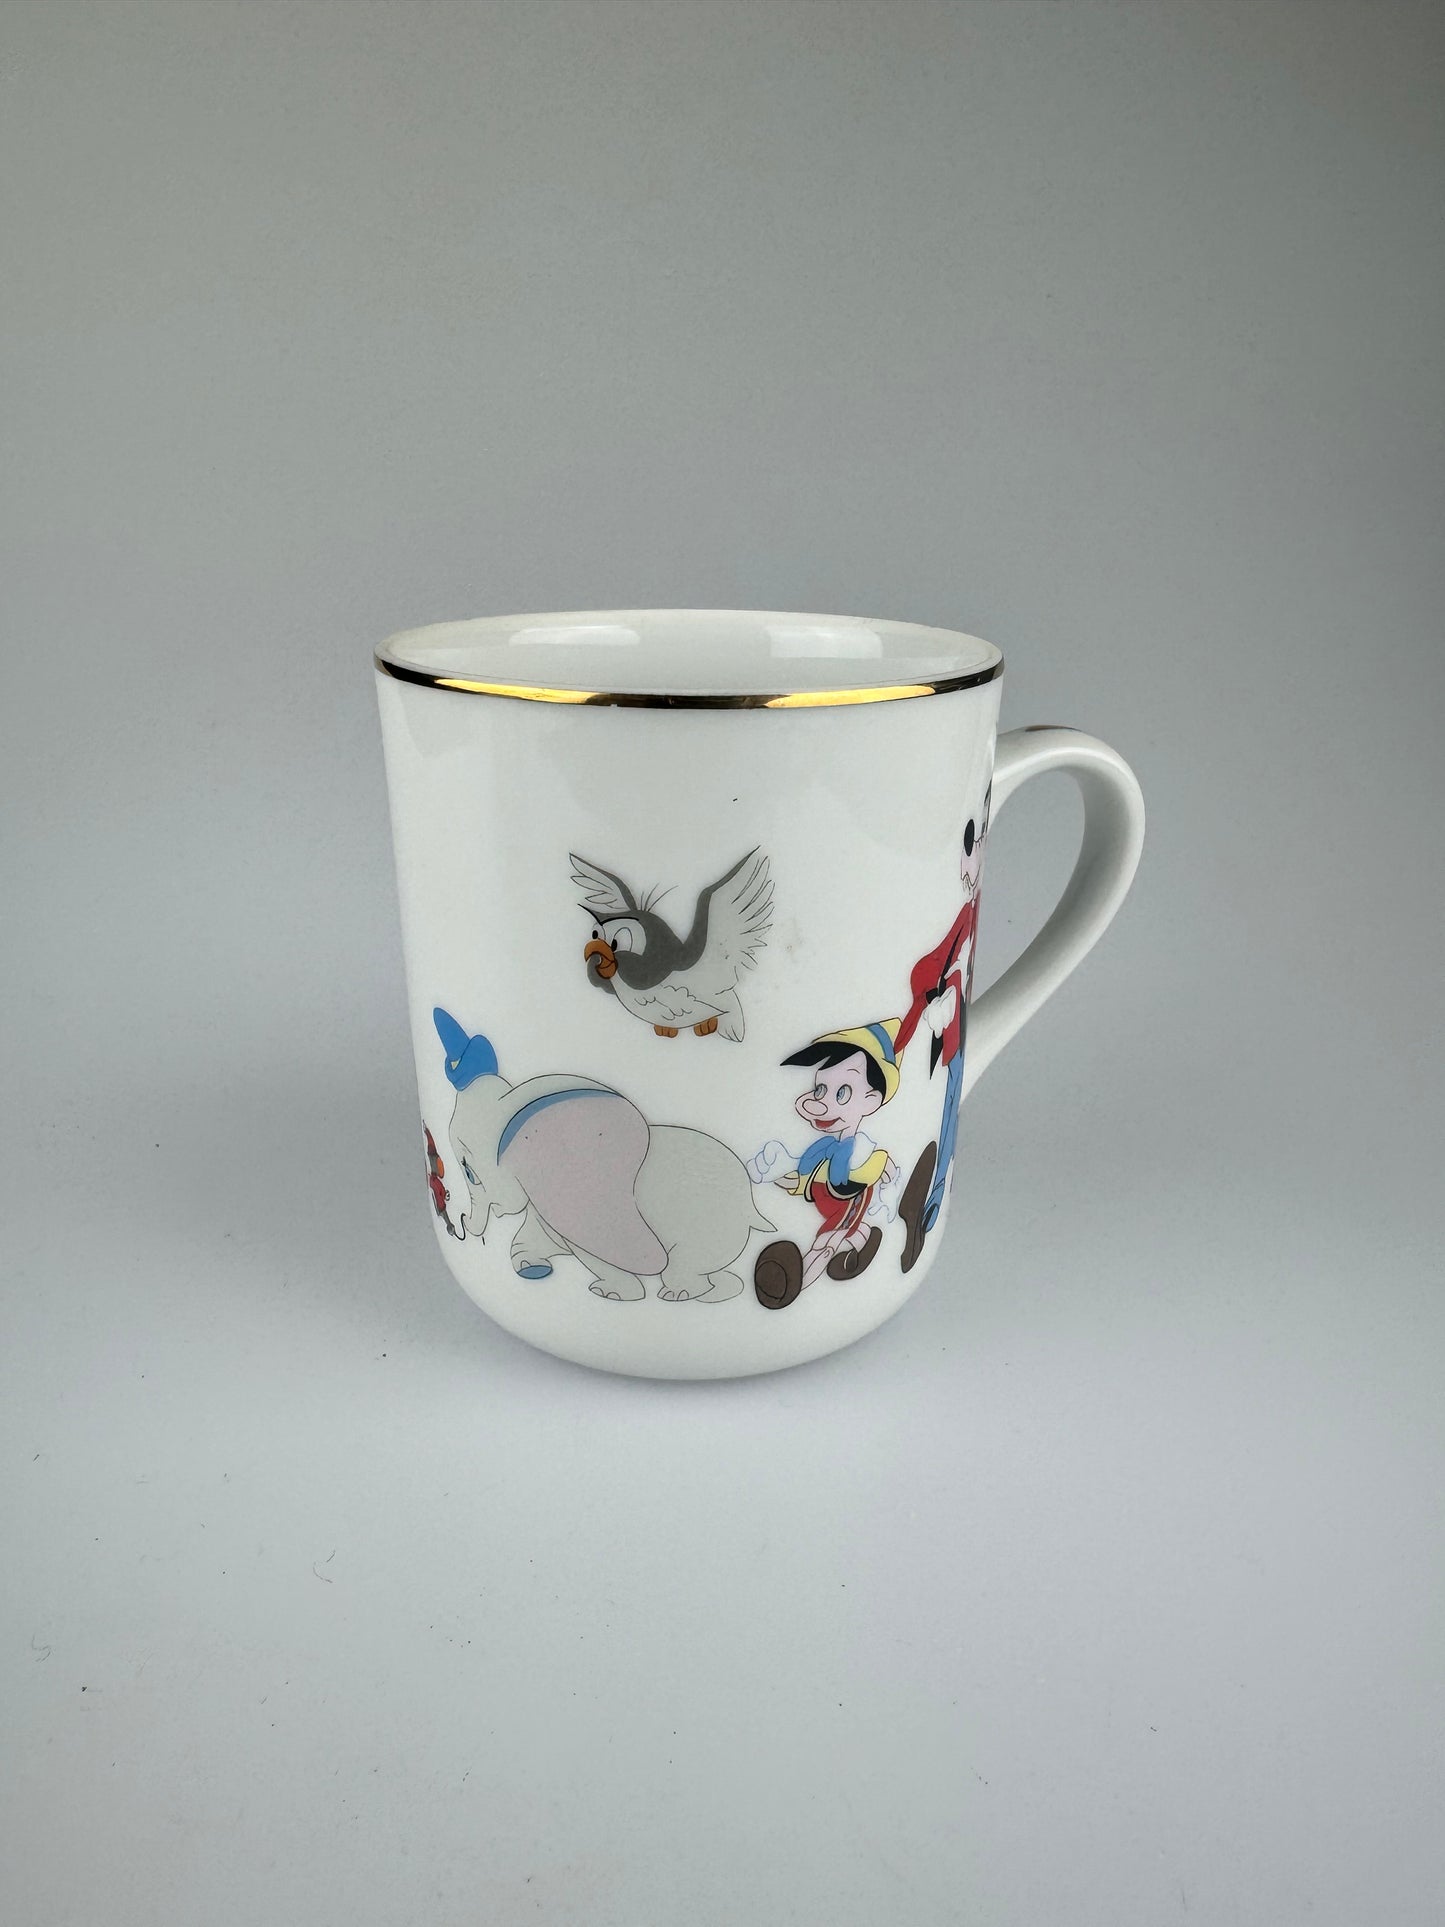 Vintage 1970s Collectible Disney Porcelain Mug - Mickey and Classic Characters - Japan